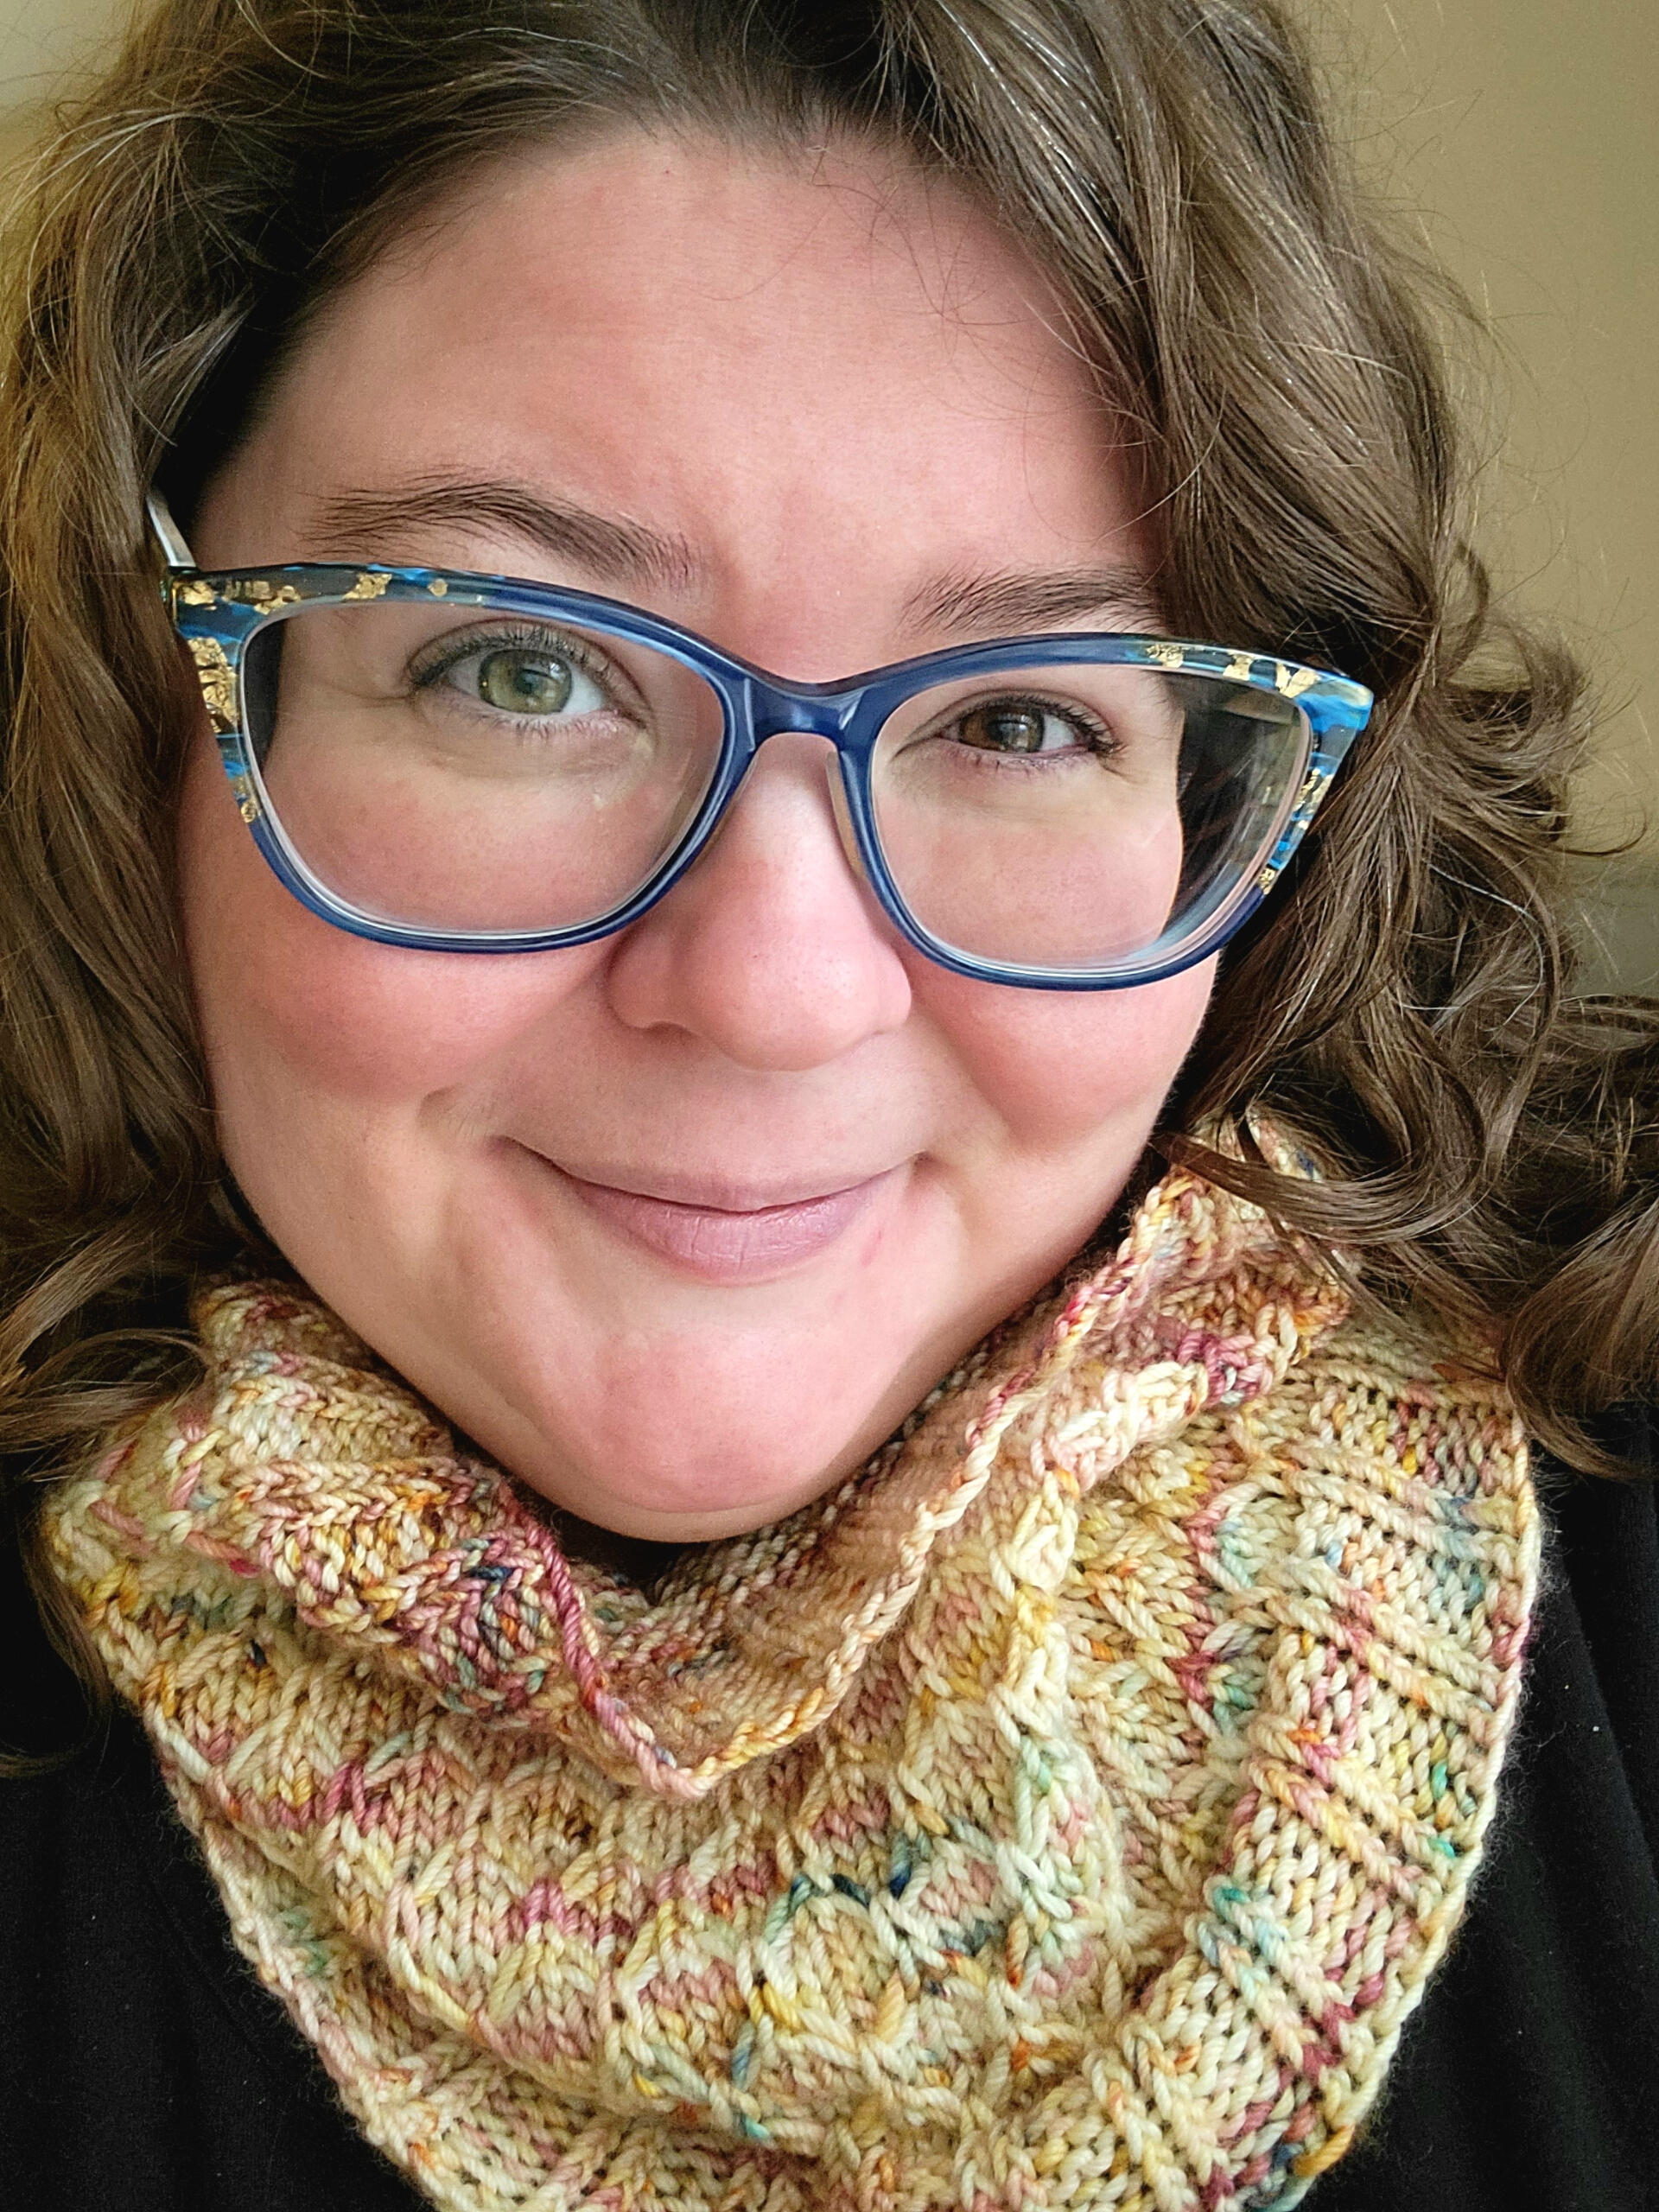 A smiling white woman with oversized blue glasses, curling brown hair, and hazel eyes. She wears a knitted cowl with various shades of gold and speckled with autumnal colors.